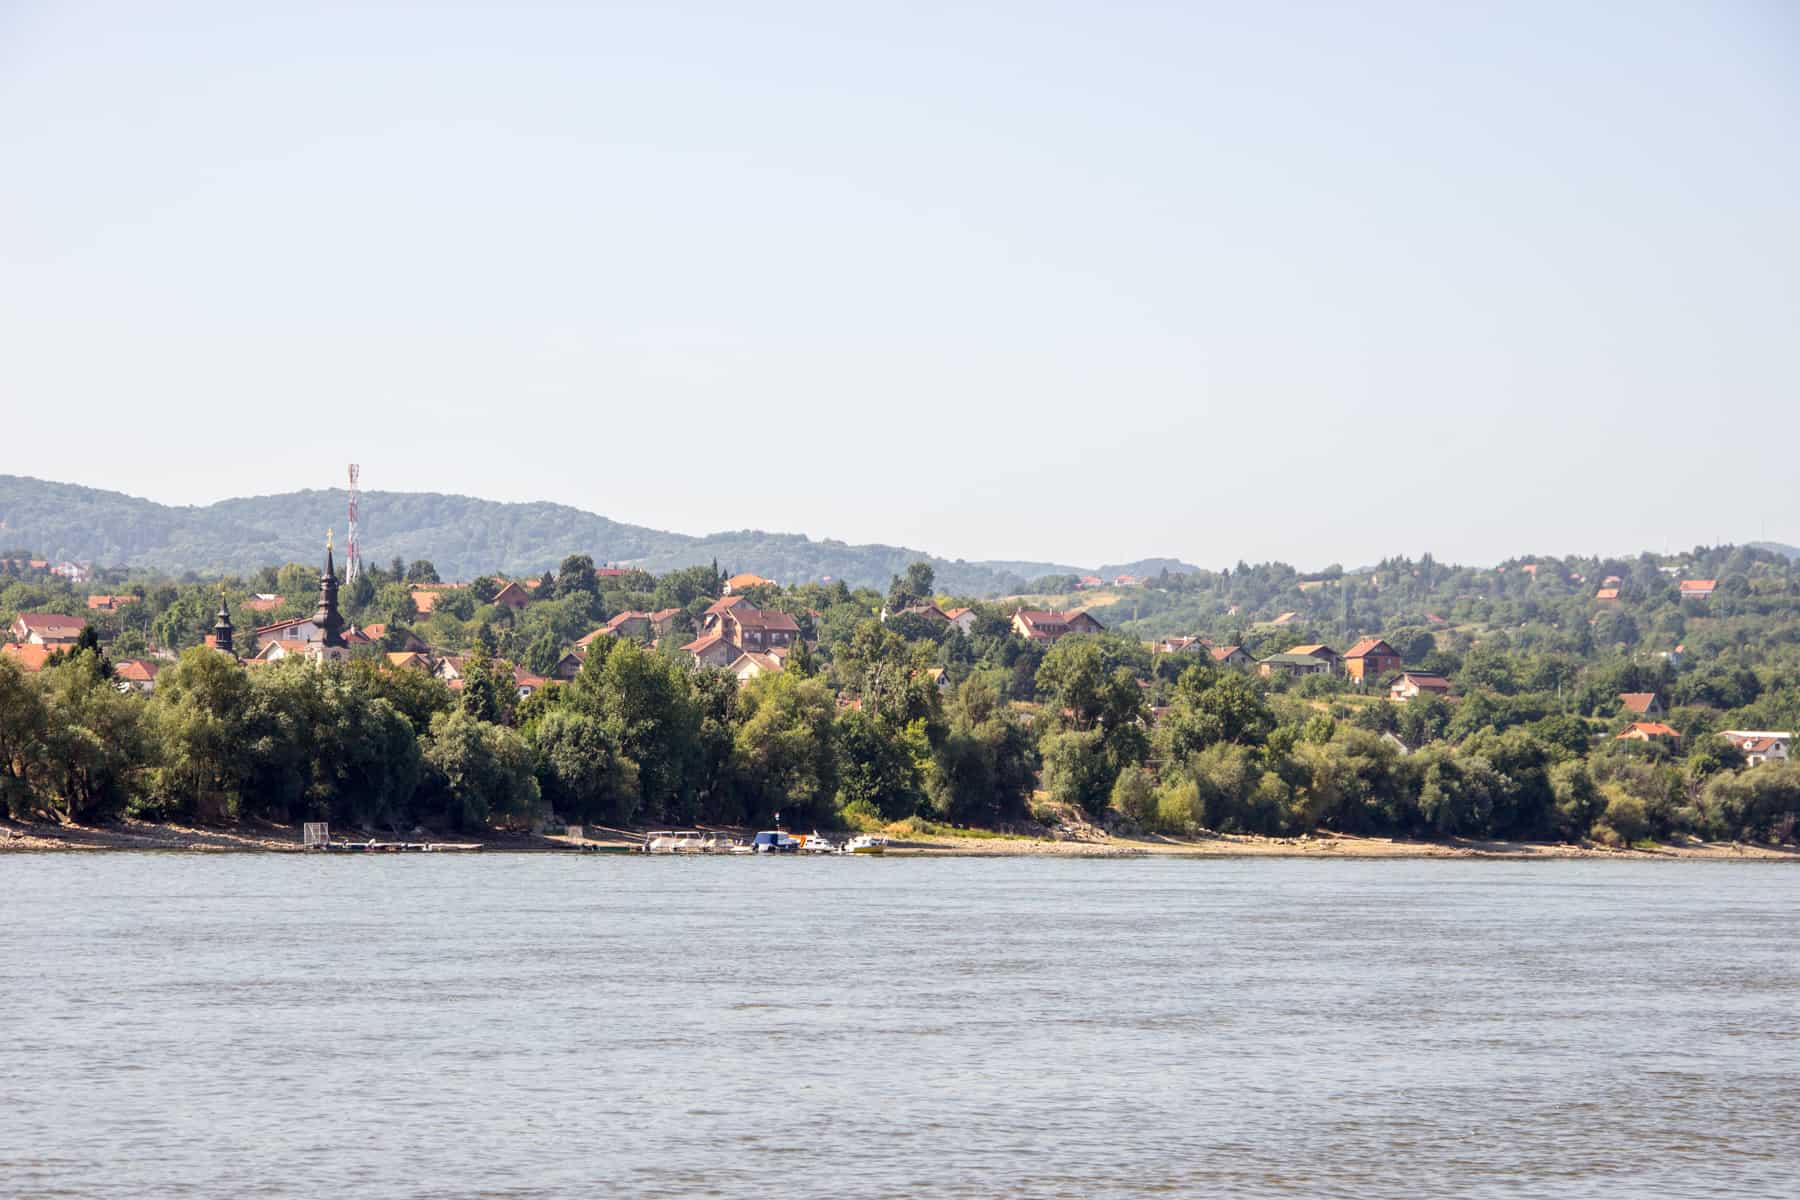 Orange red houses poke through thick forest on the banks of the Danube River in Serbia. 